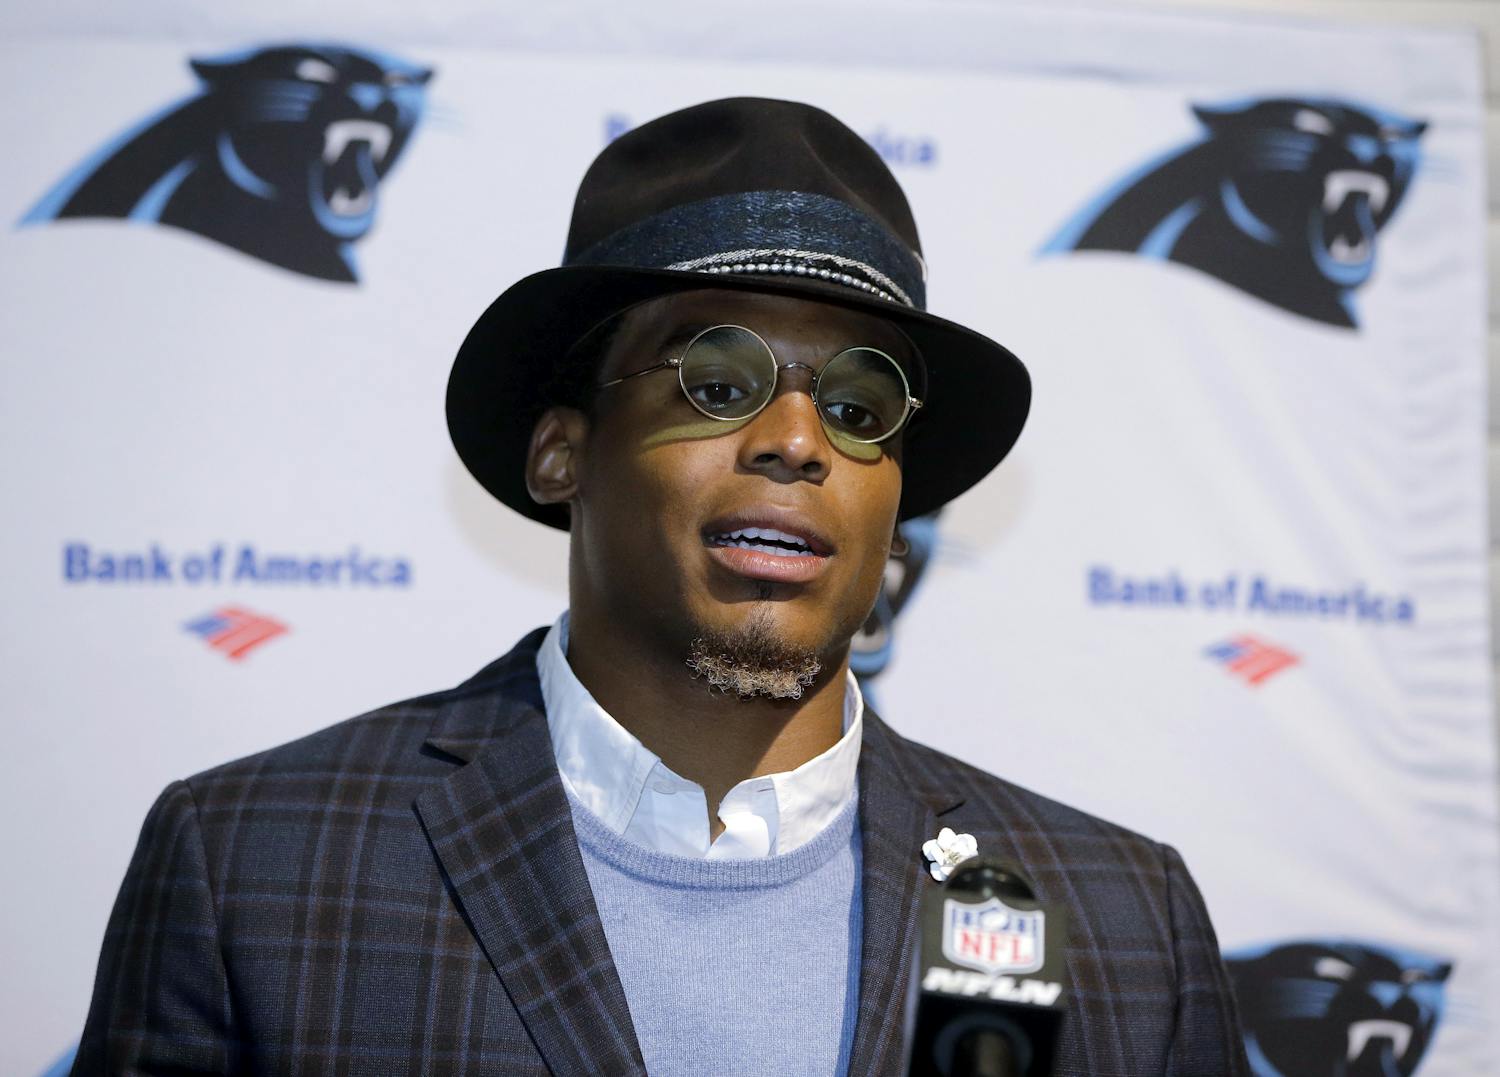 Carolina Panthers quarterback Cam Newton speaks to the media following an NFL football game against the Carolina Panthers, Sunday, Oct. 1, 2017, in Foxborough, Mass. (AP Photo/Steven Senne)